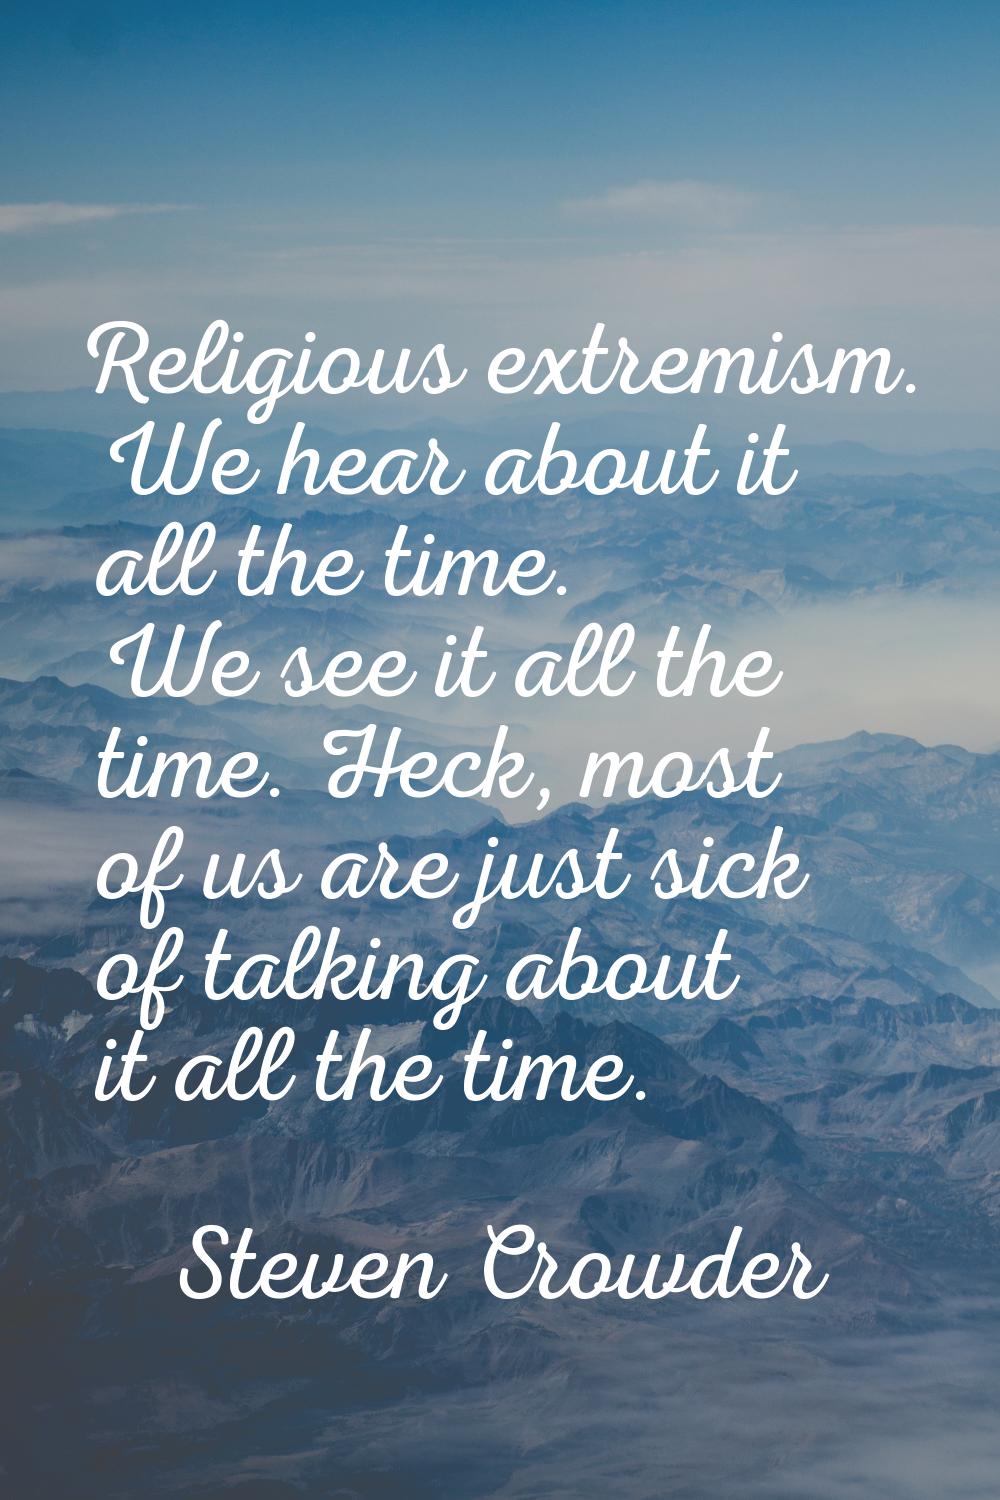 Religious extremism. We hear about it all the time. We see it all the time. Heck, most of us are ju